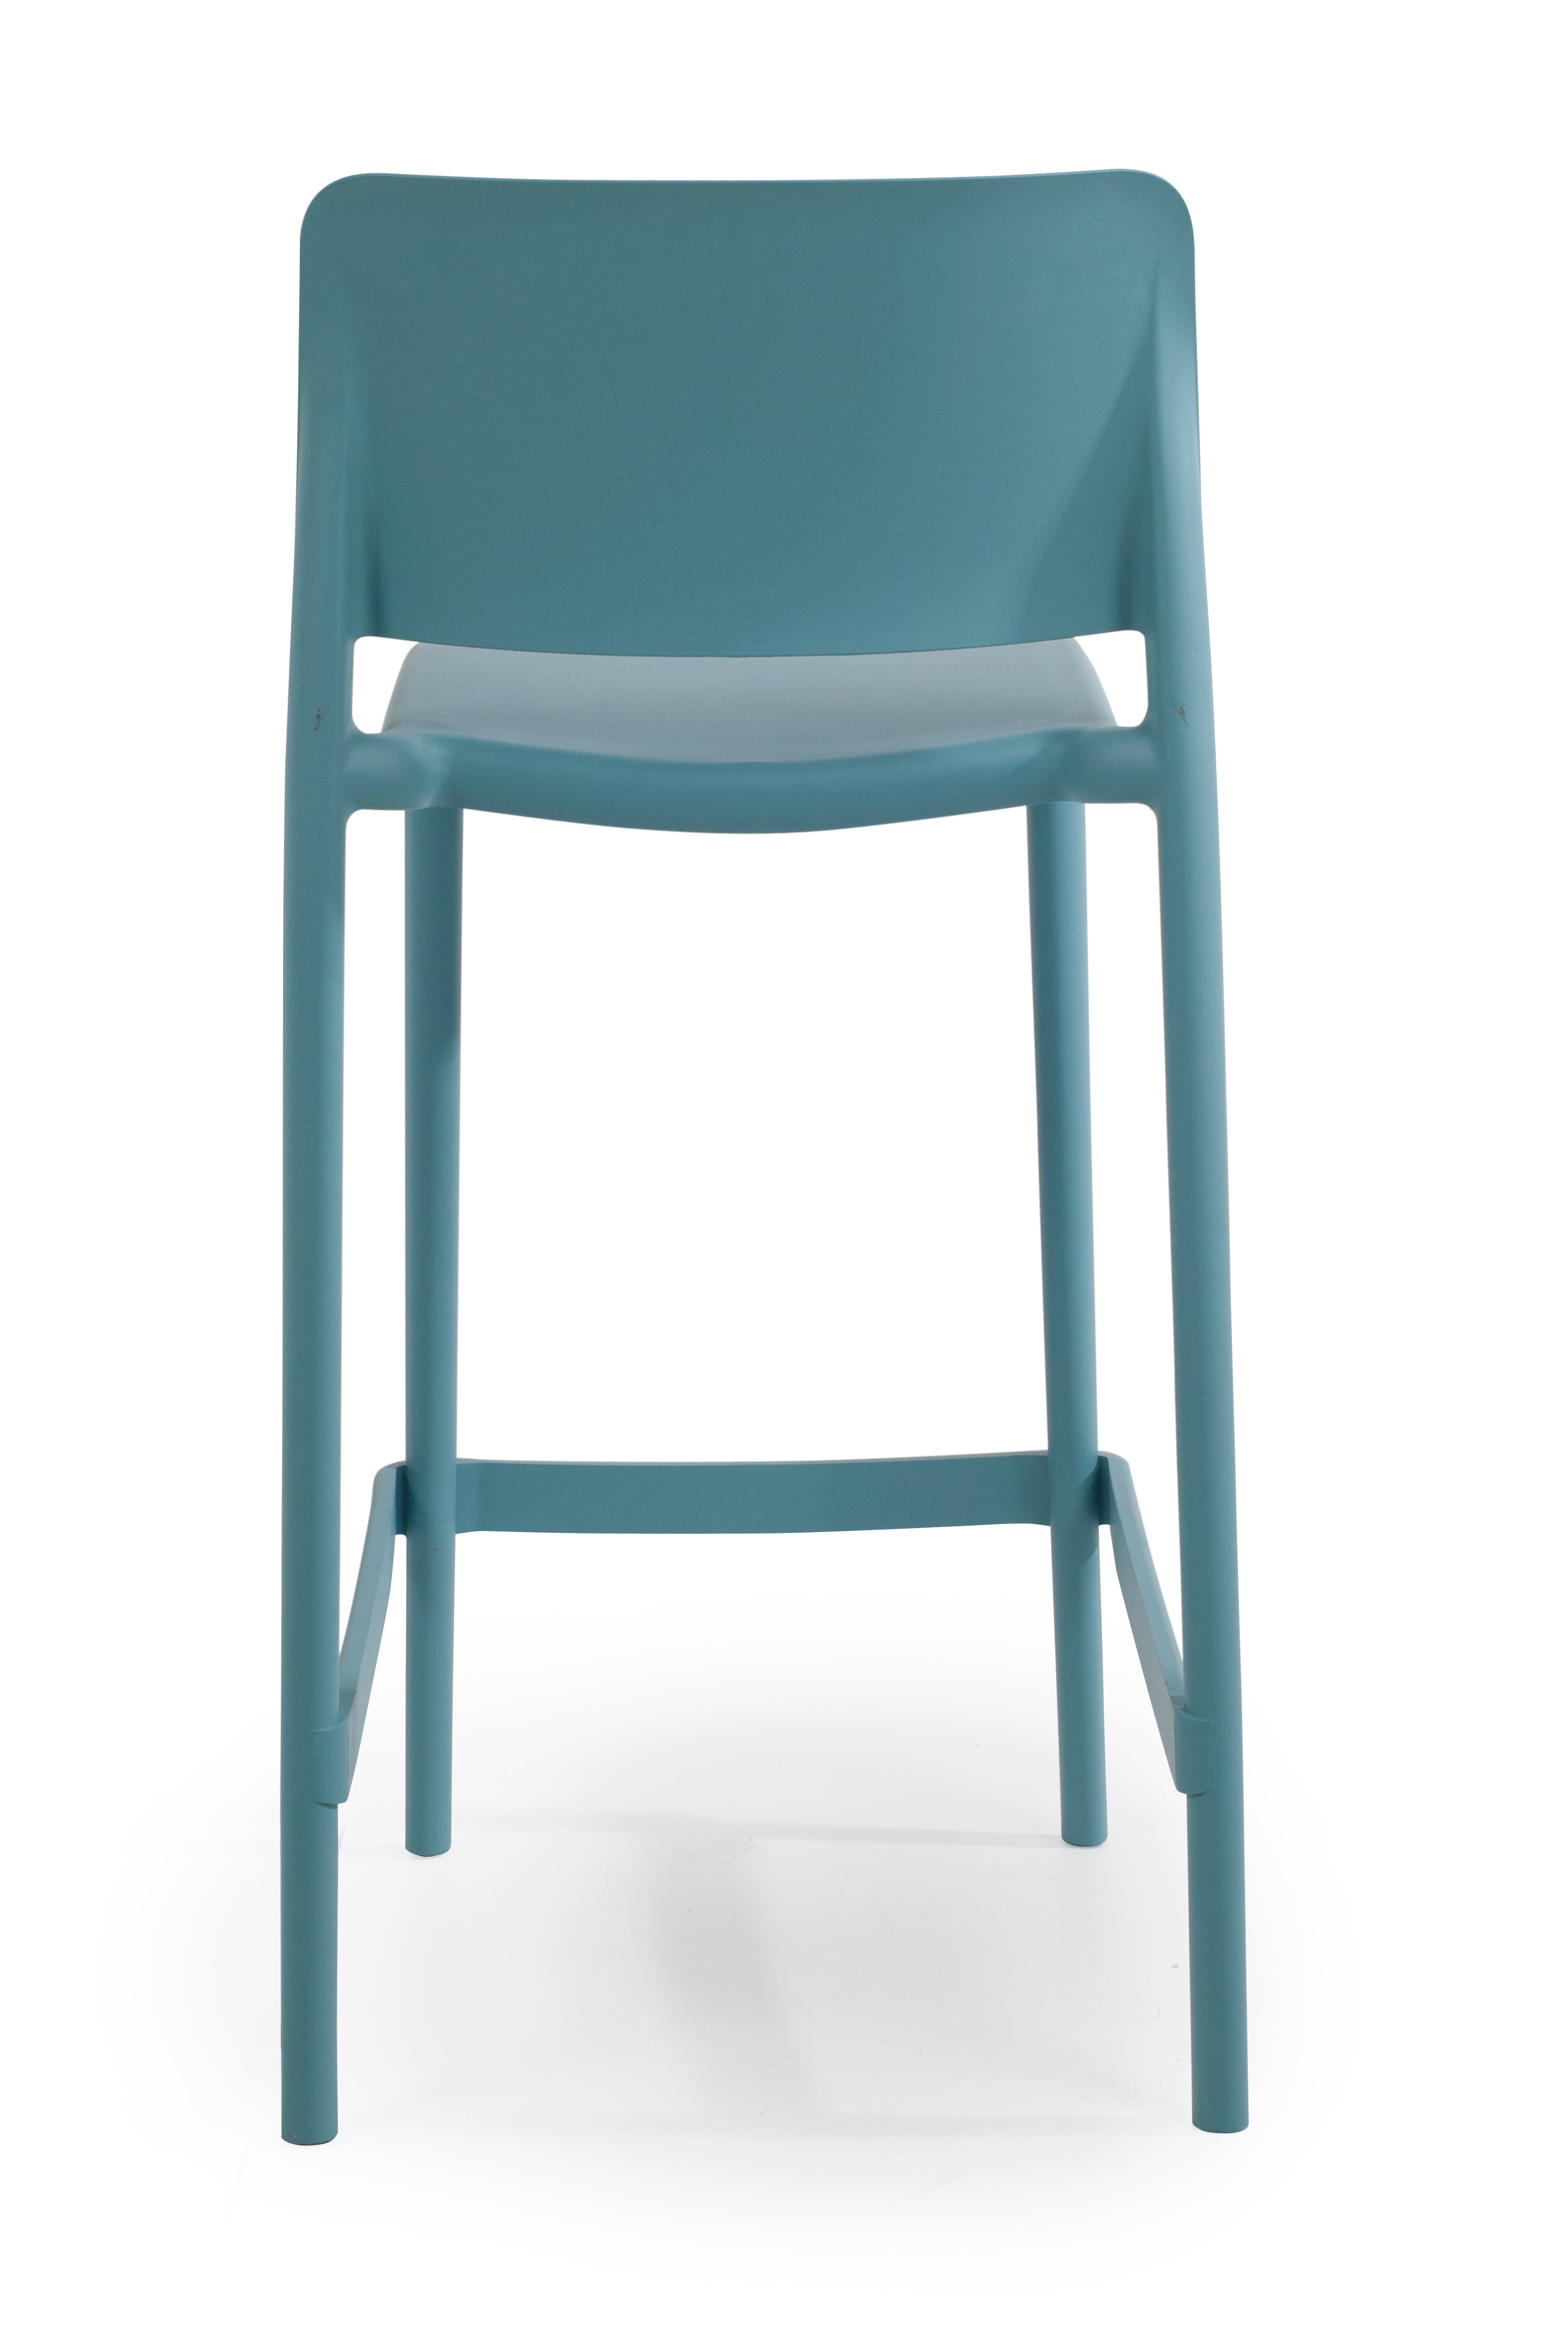 Cleo Plastic Stackable Counter Height Bar Stool in Blue - (Set of 2)